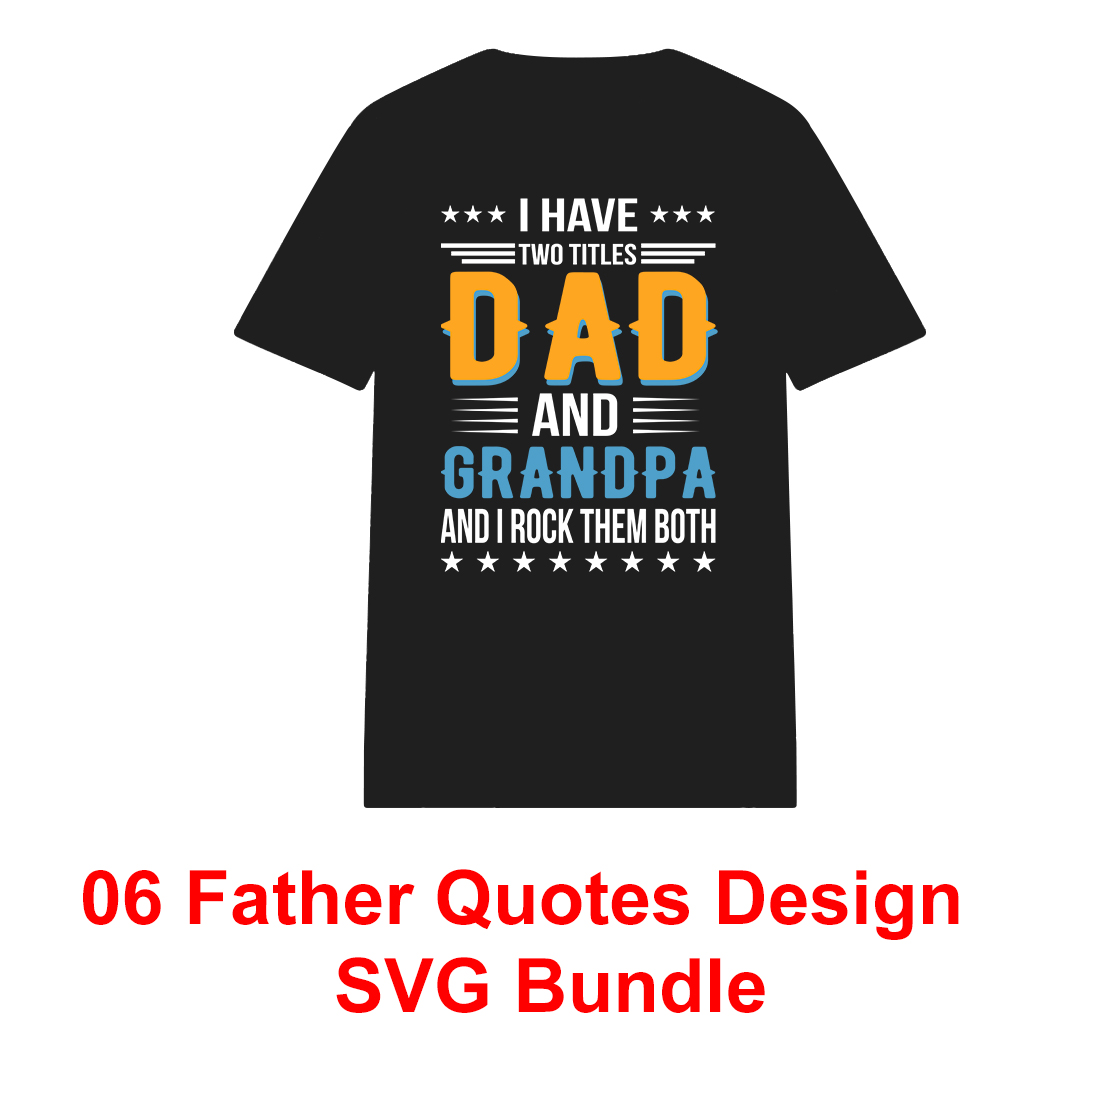 06 Father Quotes T-shirt Design cover image.